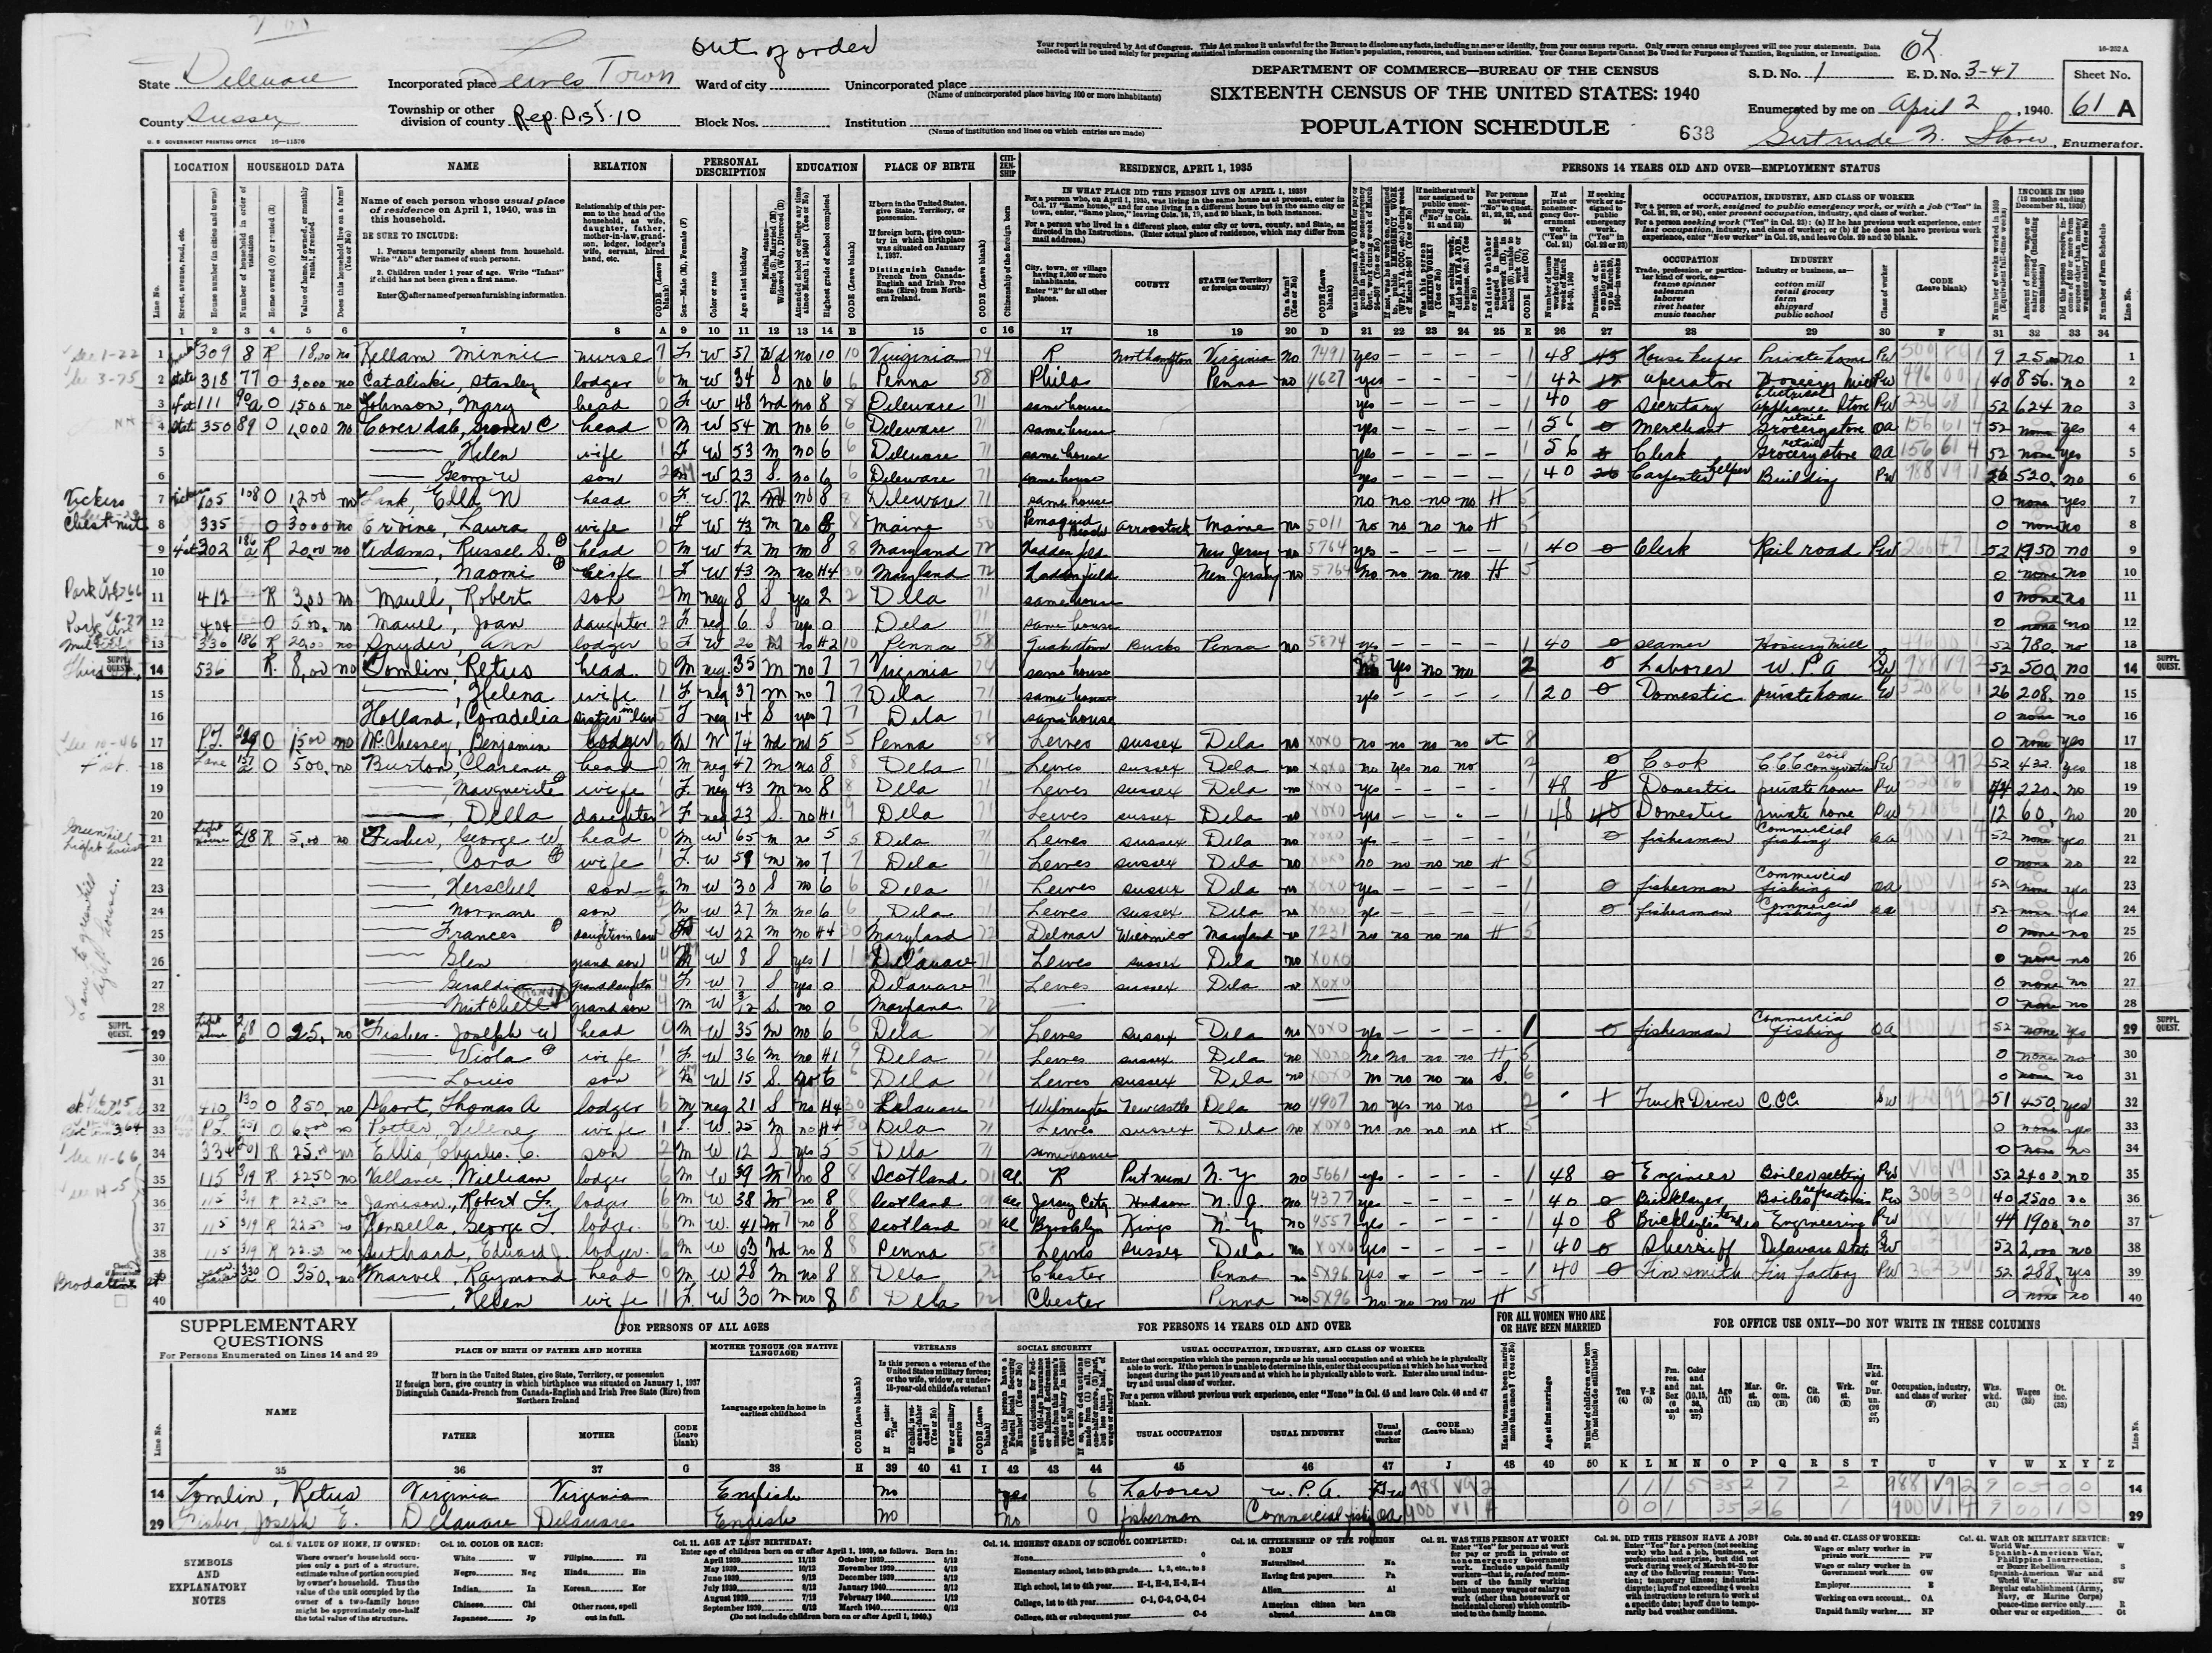 1940-CENSUS_USA-Delaware-Sussex_Lewes_p61a